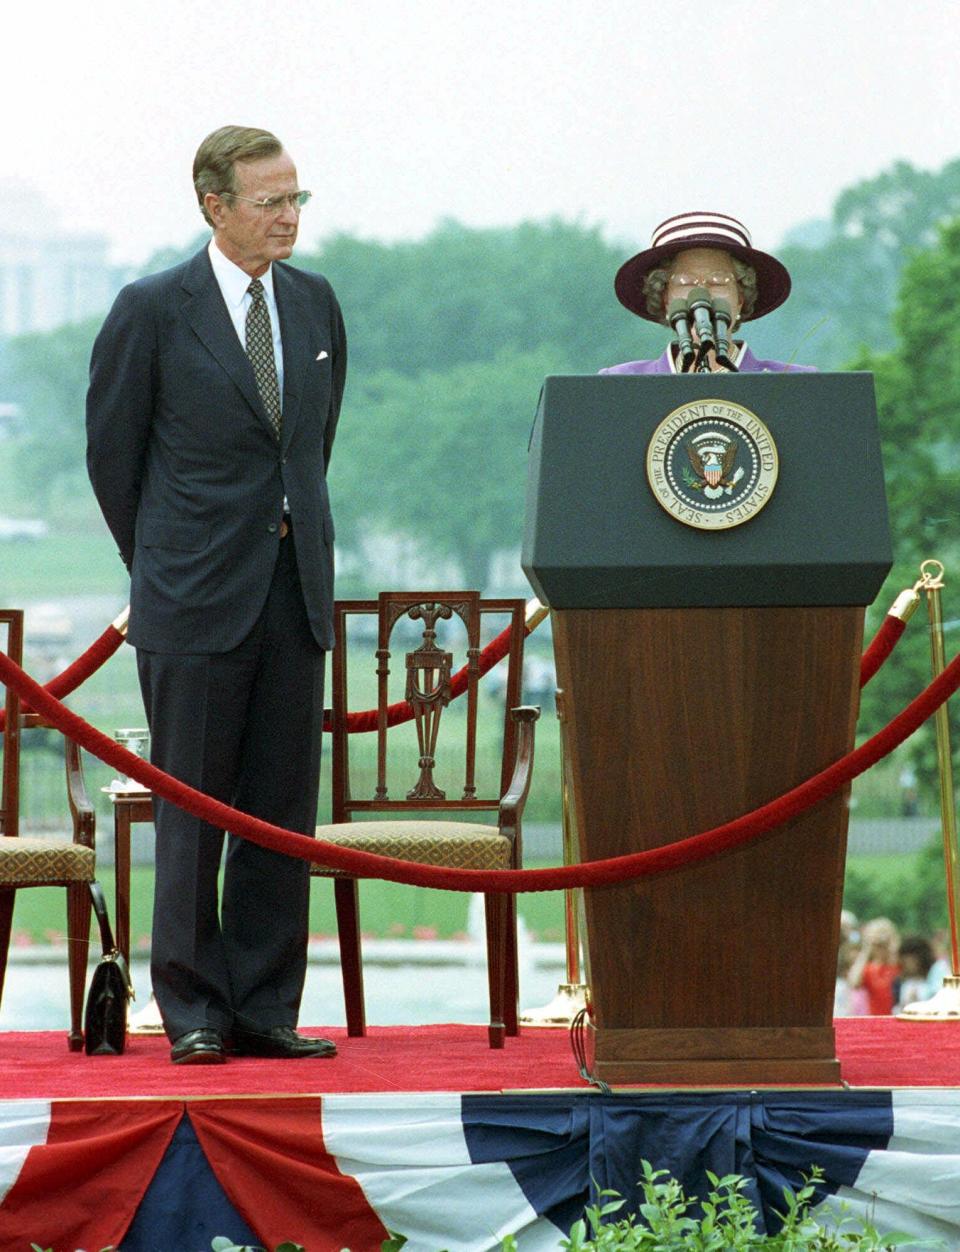 Queen Elizabeth II peers over microphones while giving arrival remarks on the White House South Lawn as President George H.W. Bush looks on May 14, 1991.